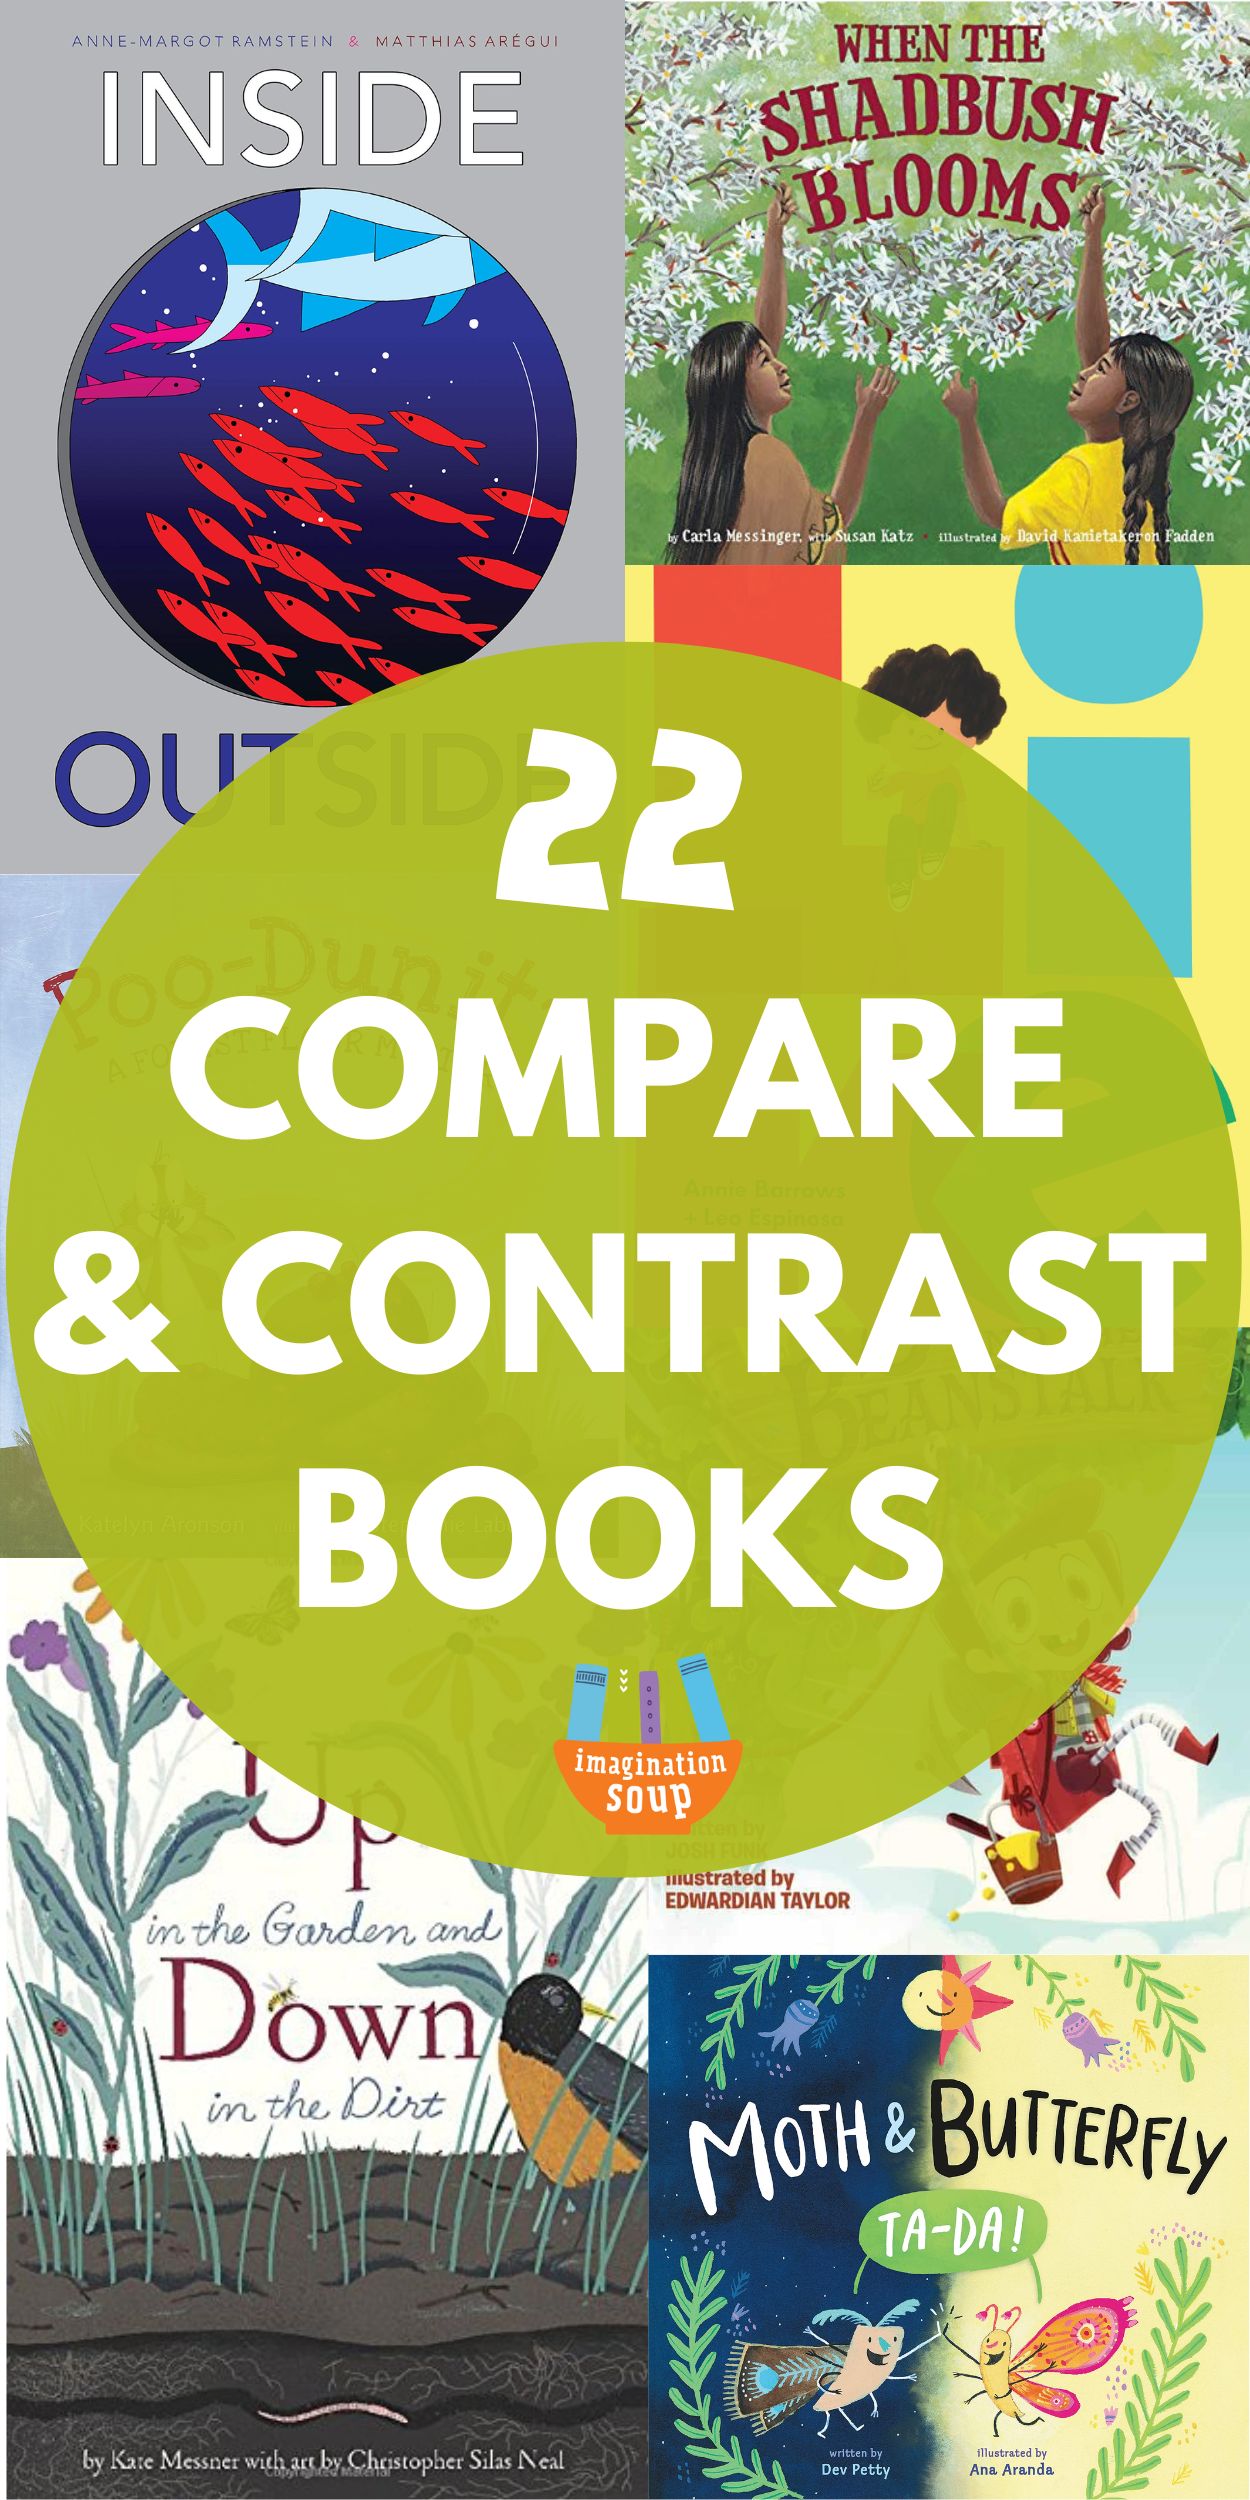 You can teach kids to compare and contrast long before they're writing contrast essays in high school with thesis statements and fully developed arguments. Comparing and contrasting is an important thinking skill for young learners to determine categories and classifications. That's why, I'm going to share the best children's books to use to teach children how to compare and contrast.